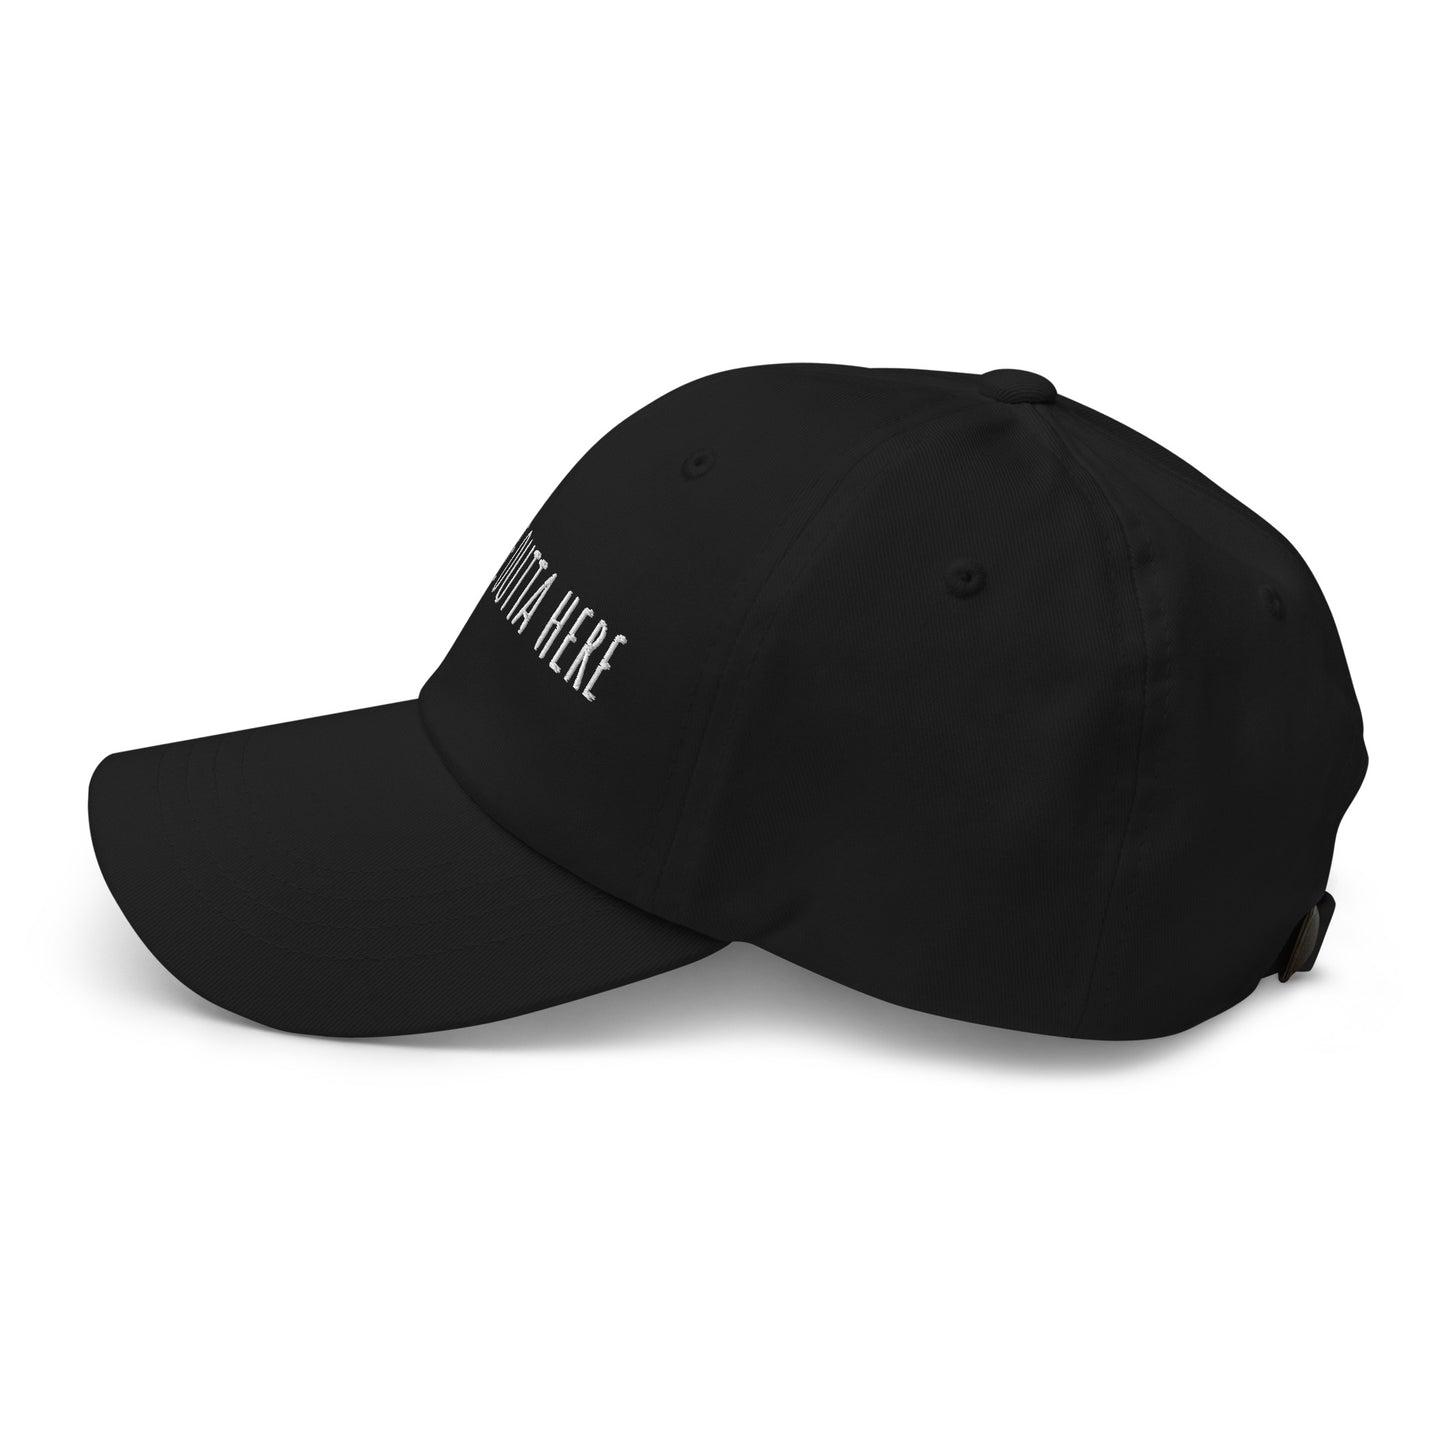 Outta Here Dad hat